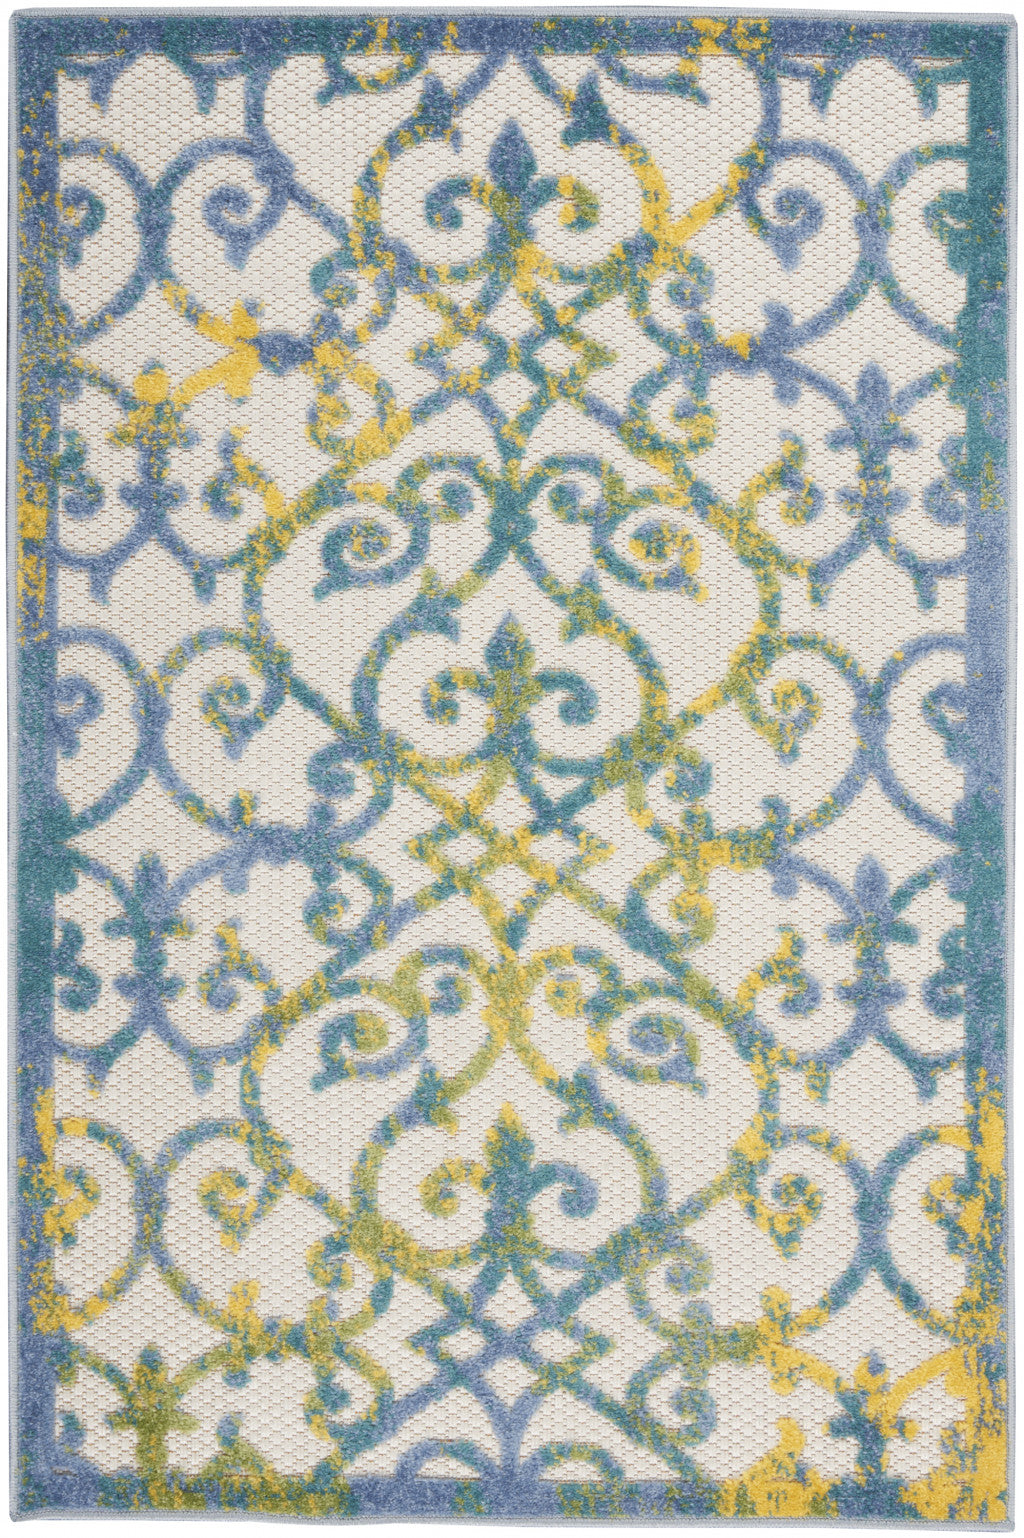 3' X 4' Ivory And Blue Damask Non Skid Indoor Outdoor Area Rug